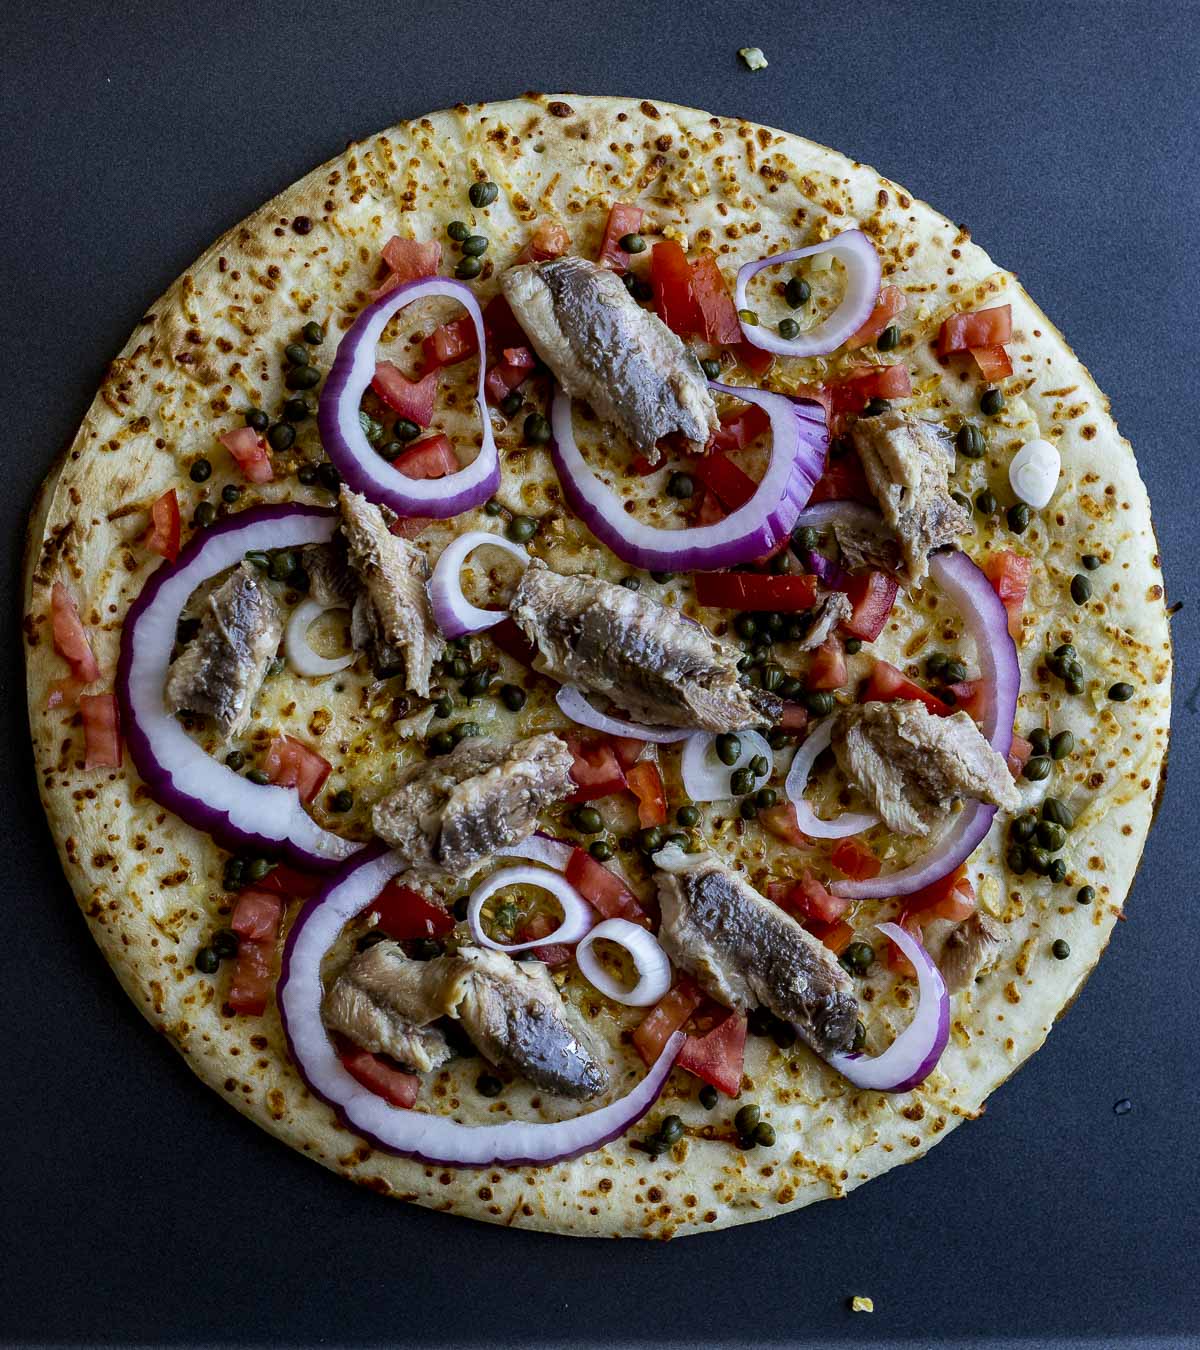 Sardines arranged on top of the pizza.